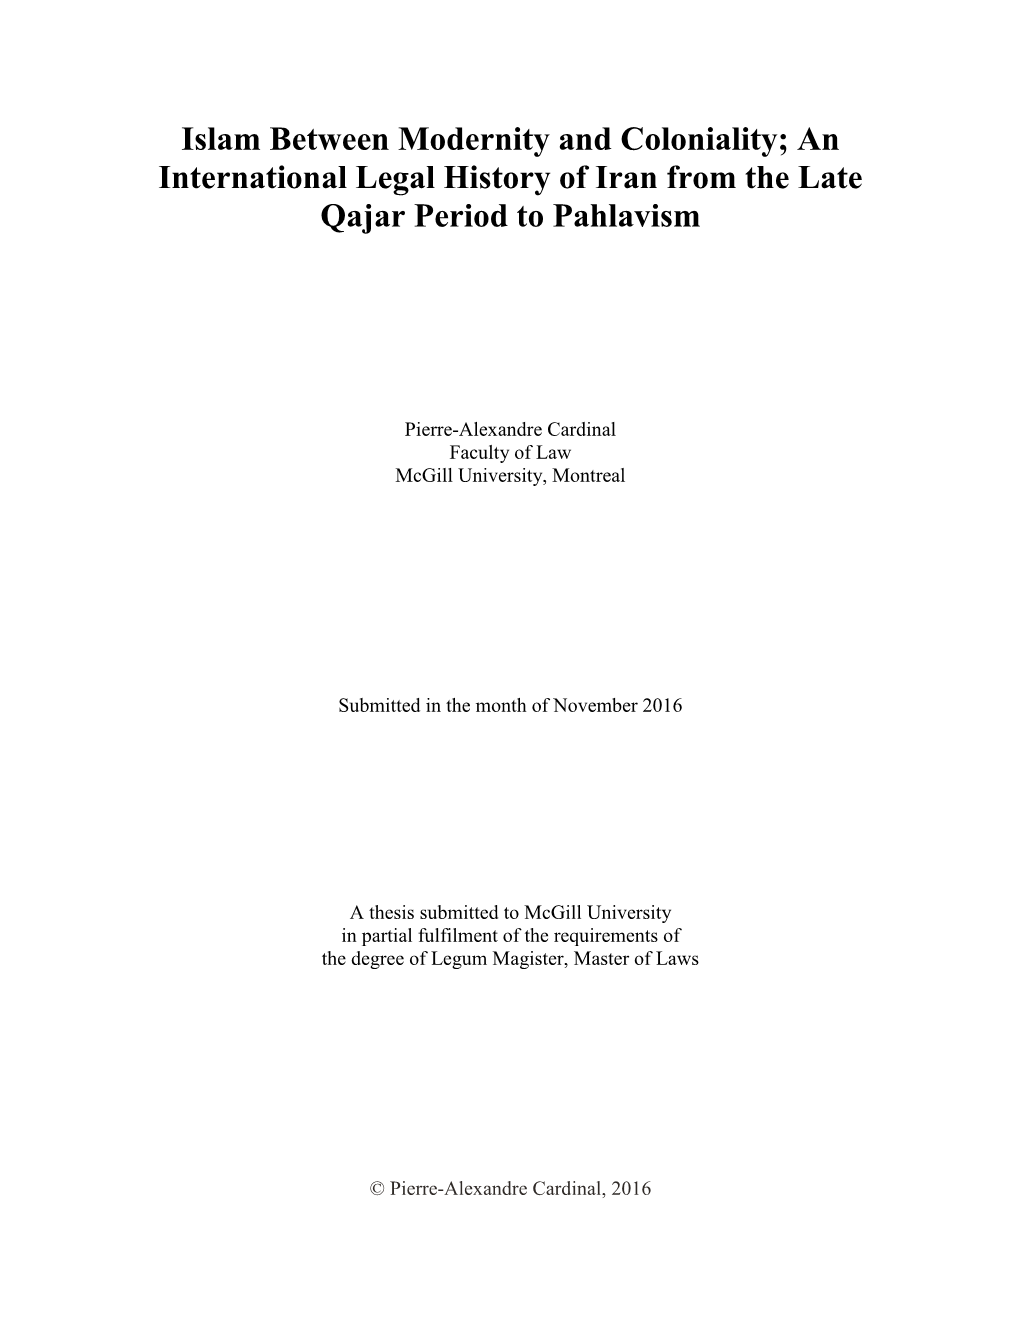 Islam Between Modernity and Coloniality; an International Legal History of Iran from the Late Qajar Period to Pahlavism